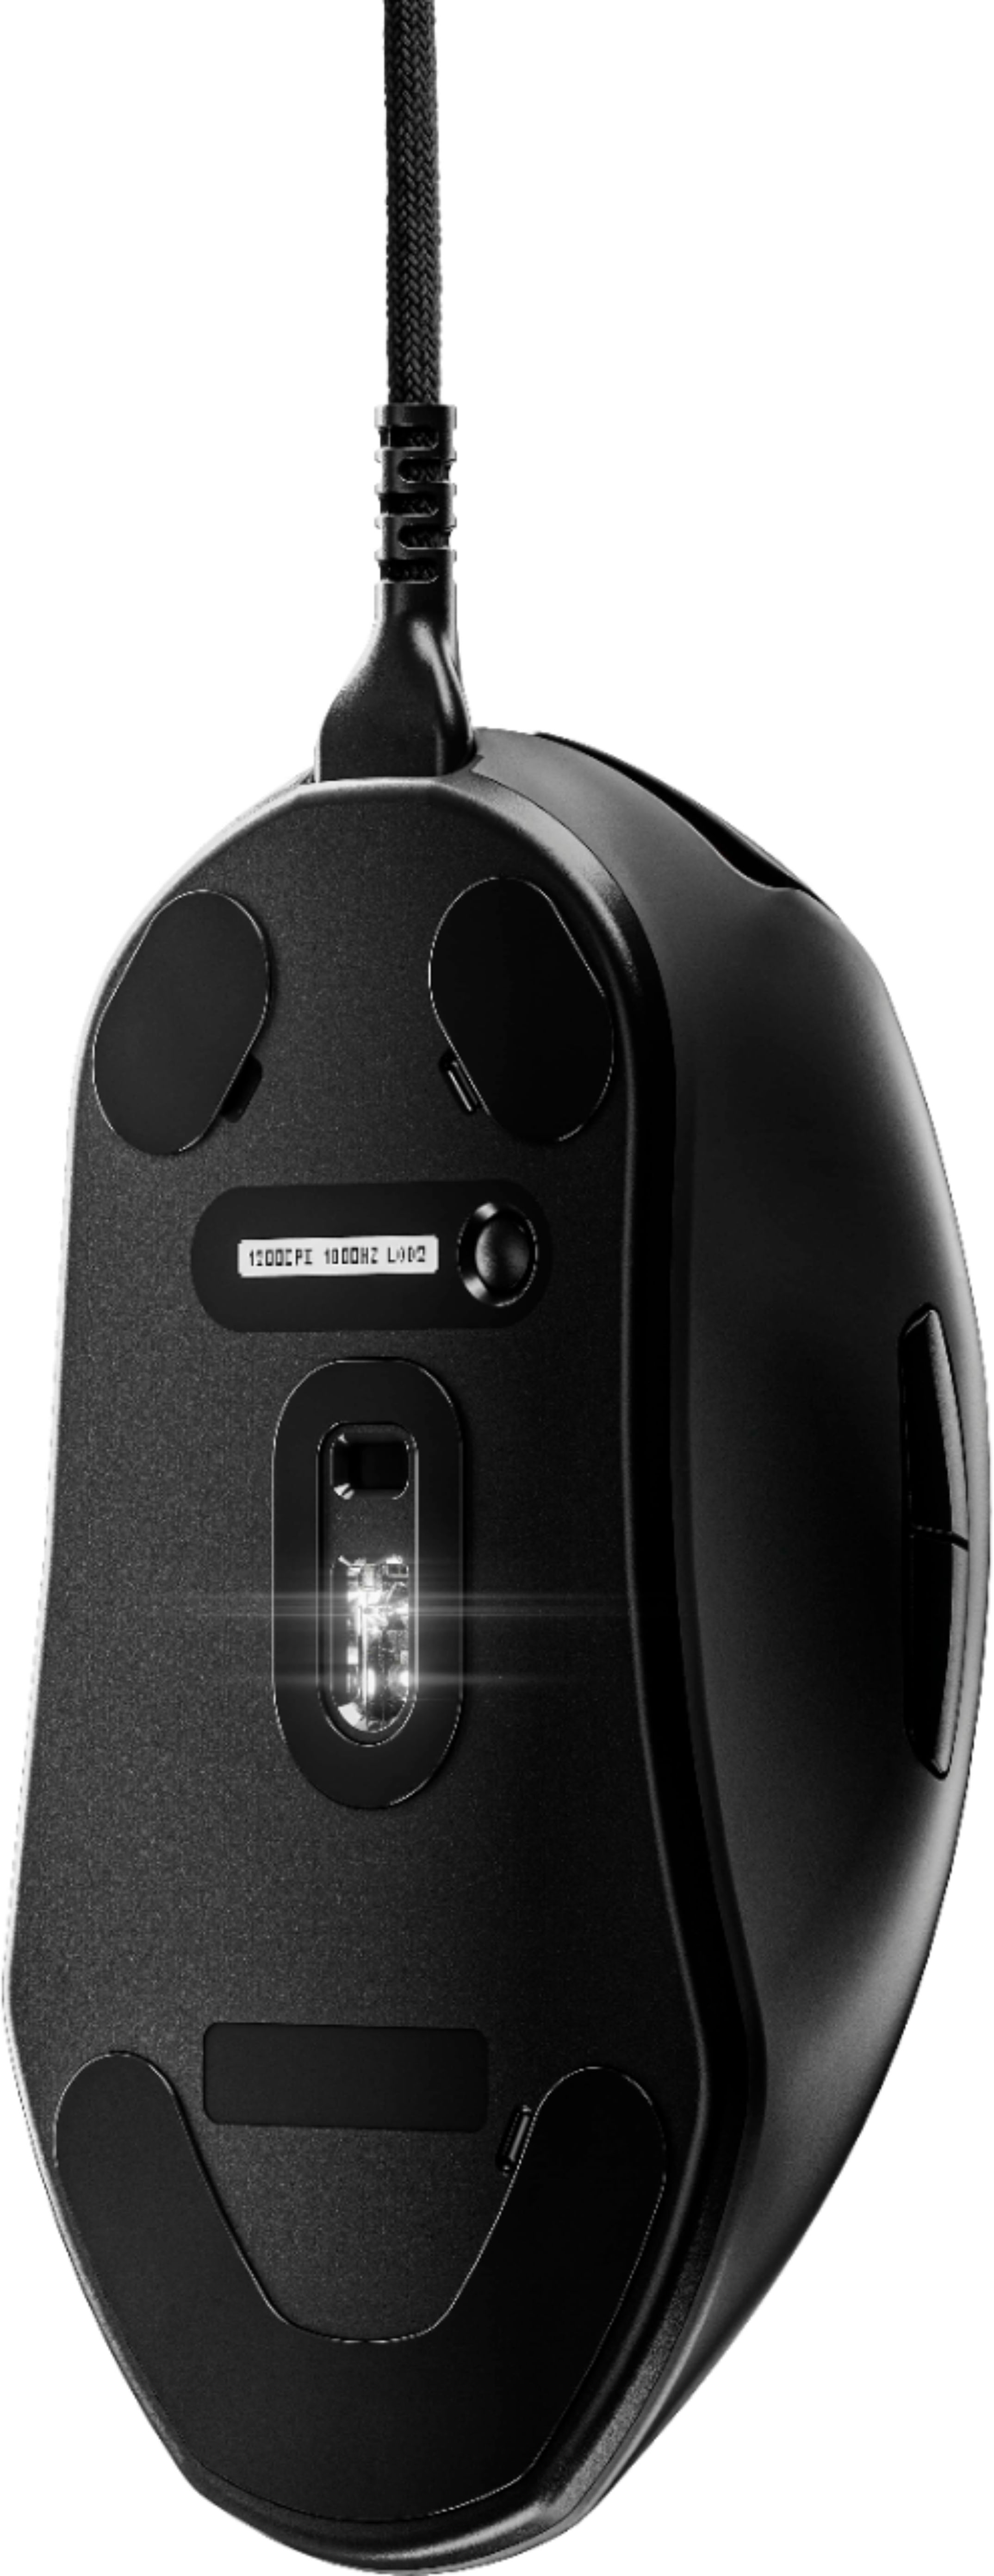 Back View: SteelSeries - Prime Lightweight Wireless Optical Gaming Mouse with RGB Lighting - Black